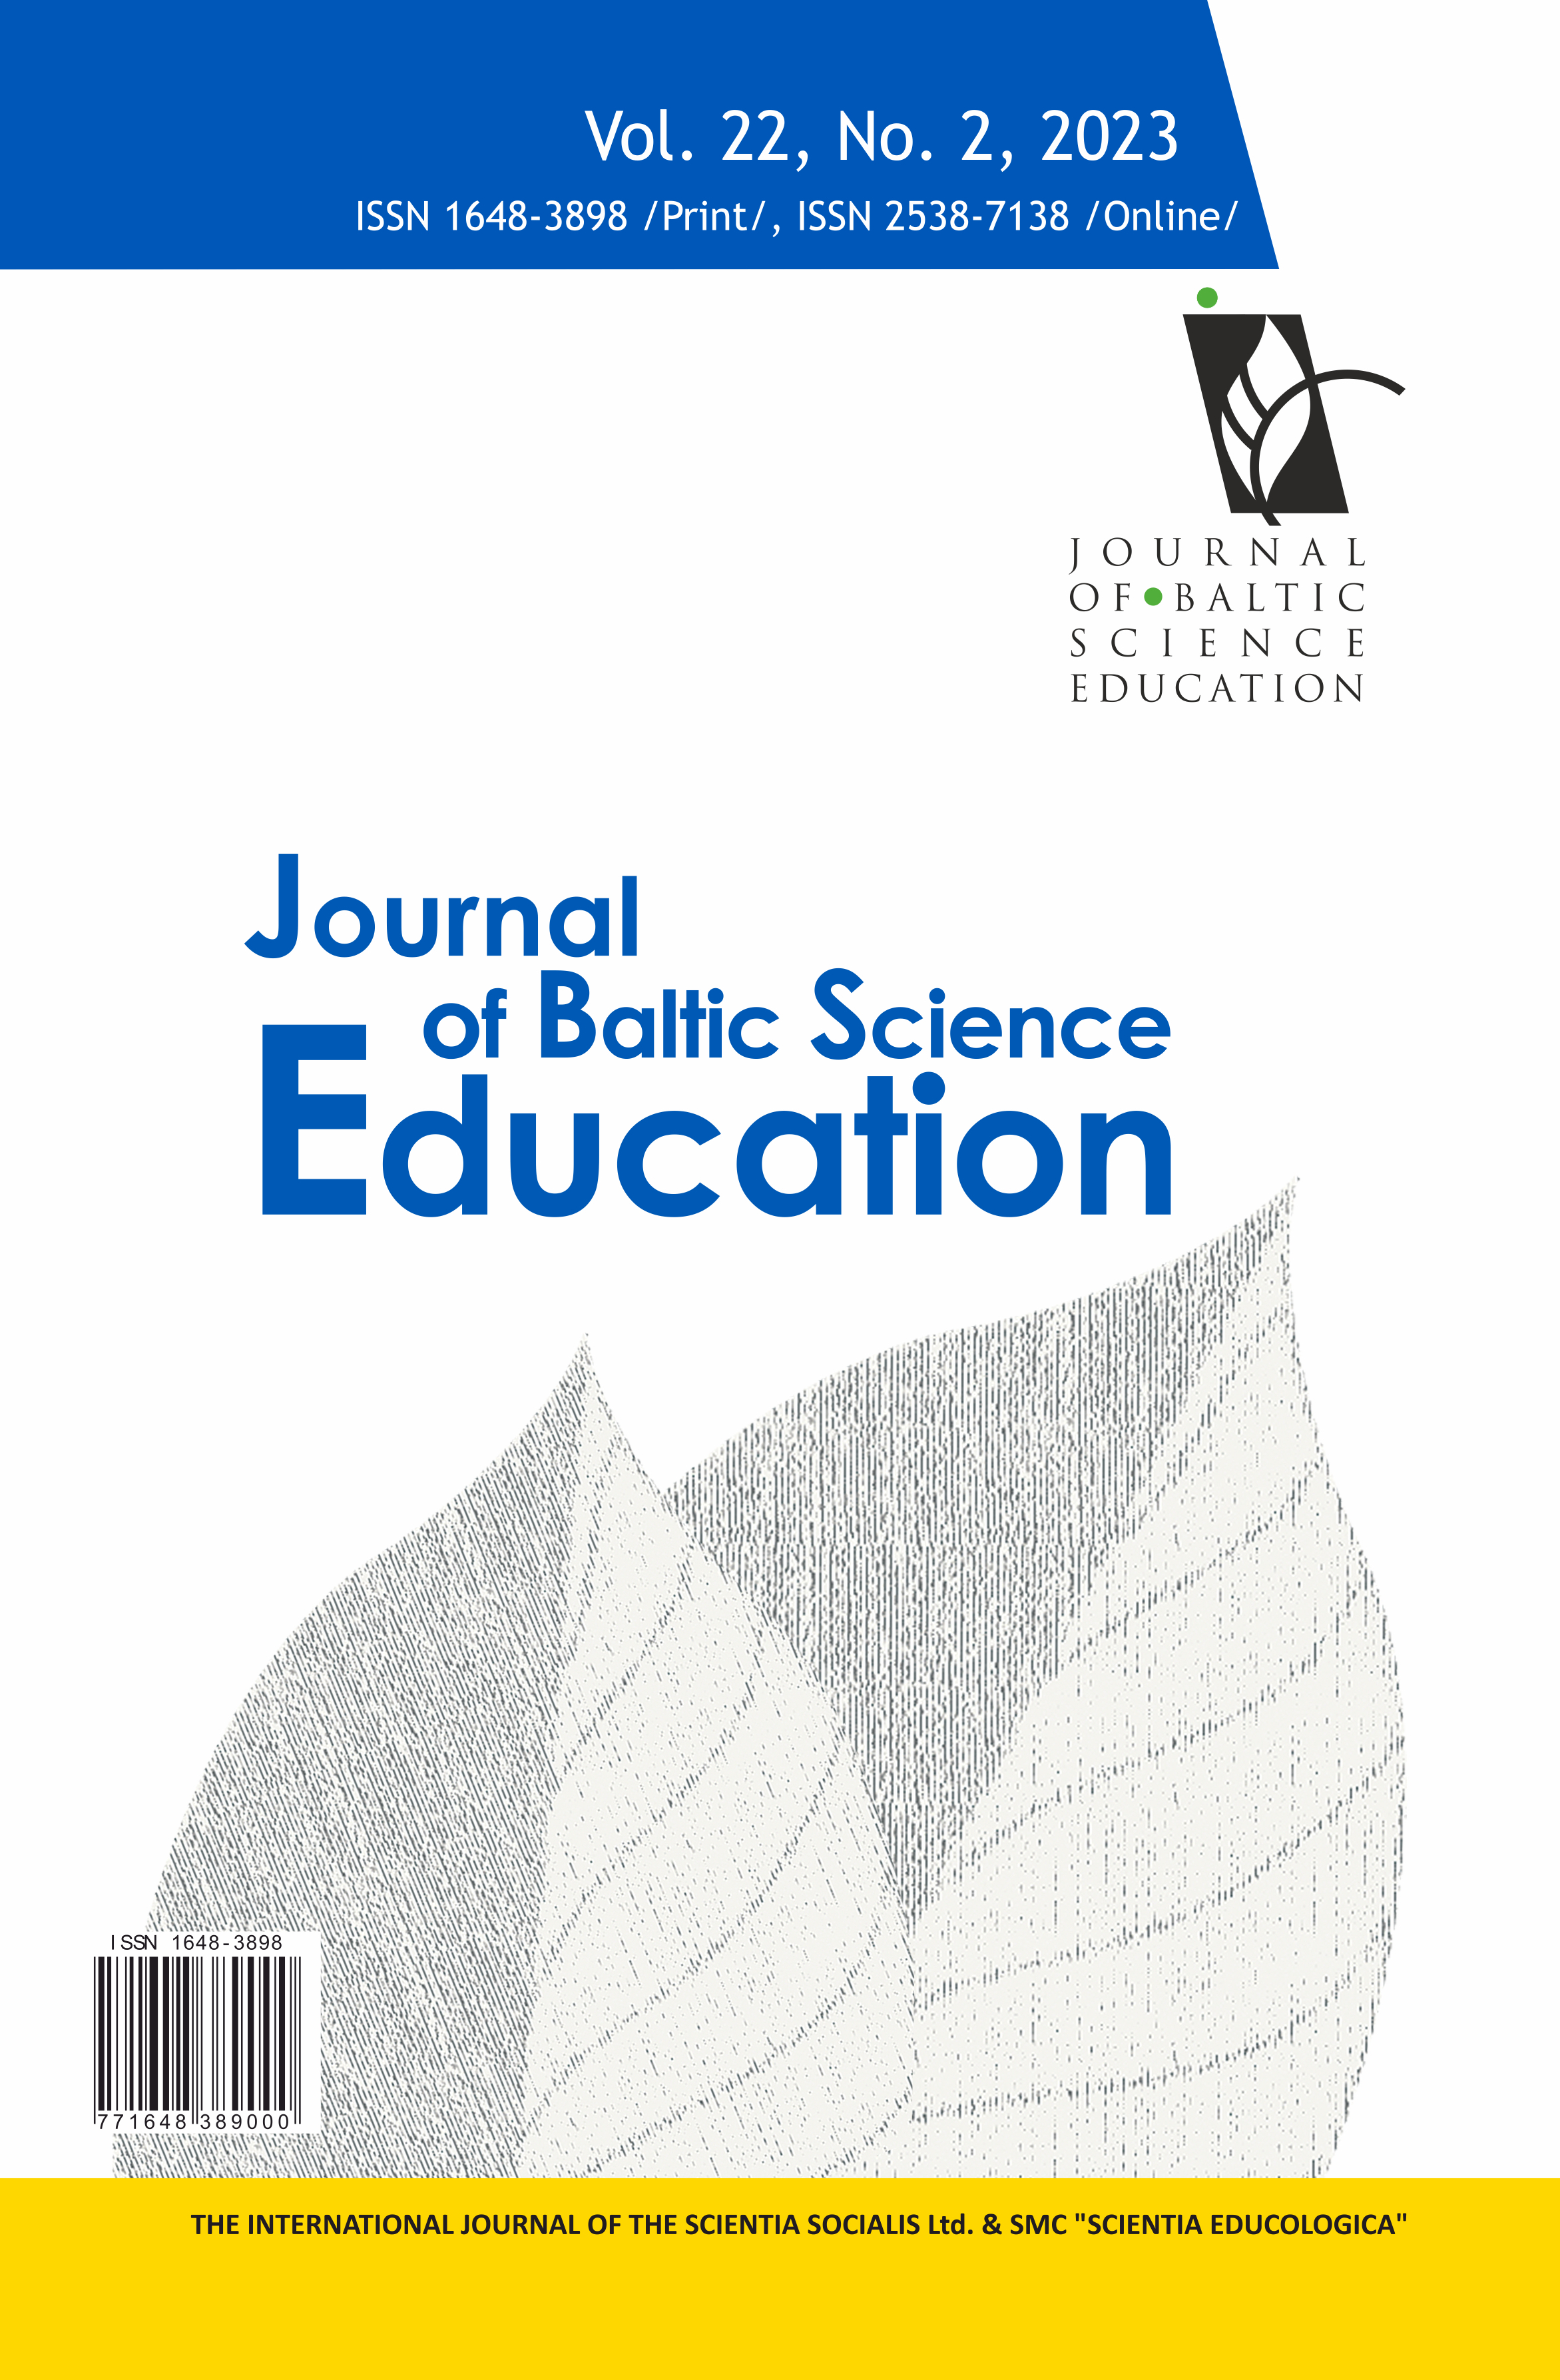 SECONDARY SCHOOL STUDENTS’ PERCEPTIONS OF SCIENCE LEARNING ENVIRONMENT AND SELF-EFFICACY IN SOUTH KOREA: GENDER DIFFERENCES